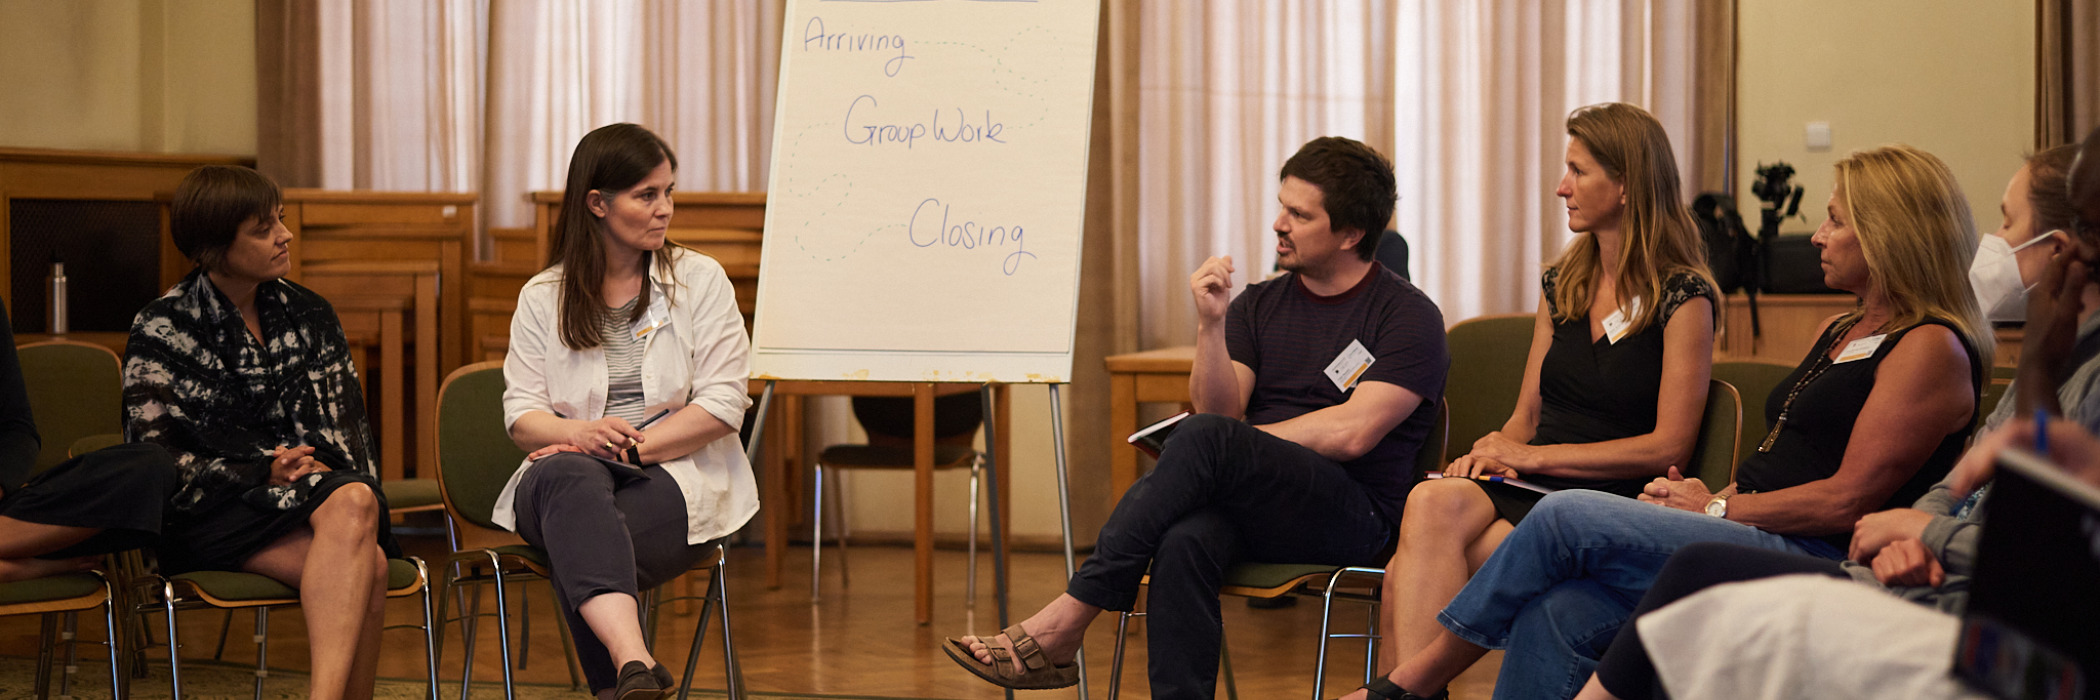 Sharing personal reflections on transformation at the European Hub in Prague.